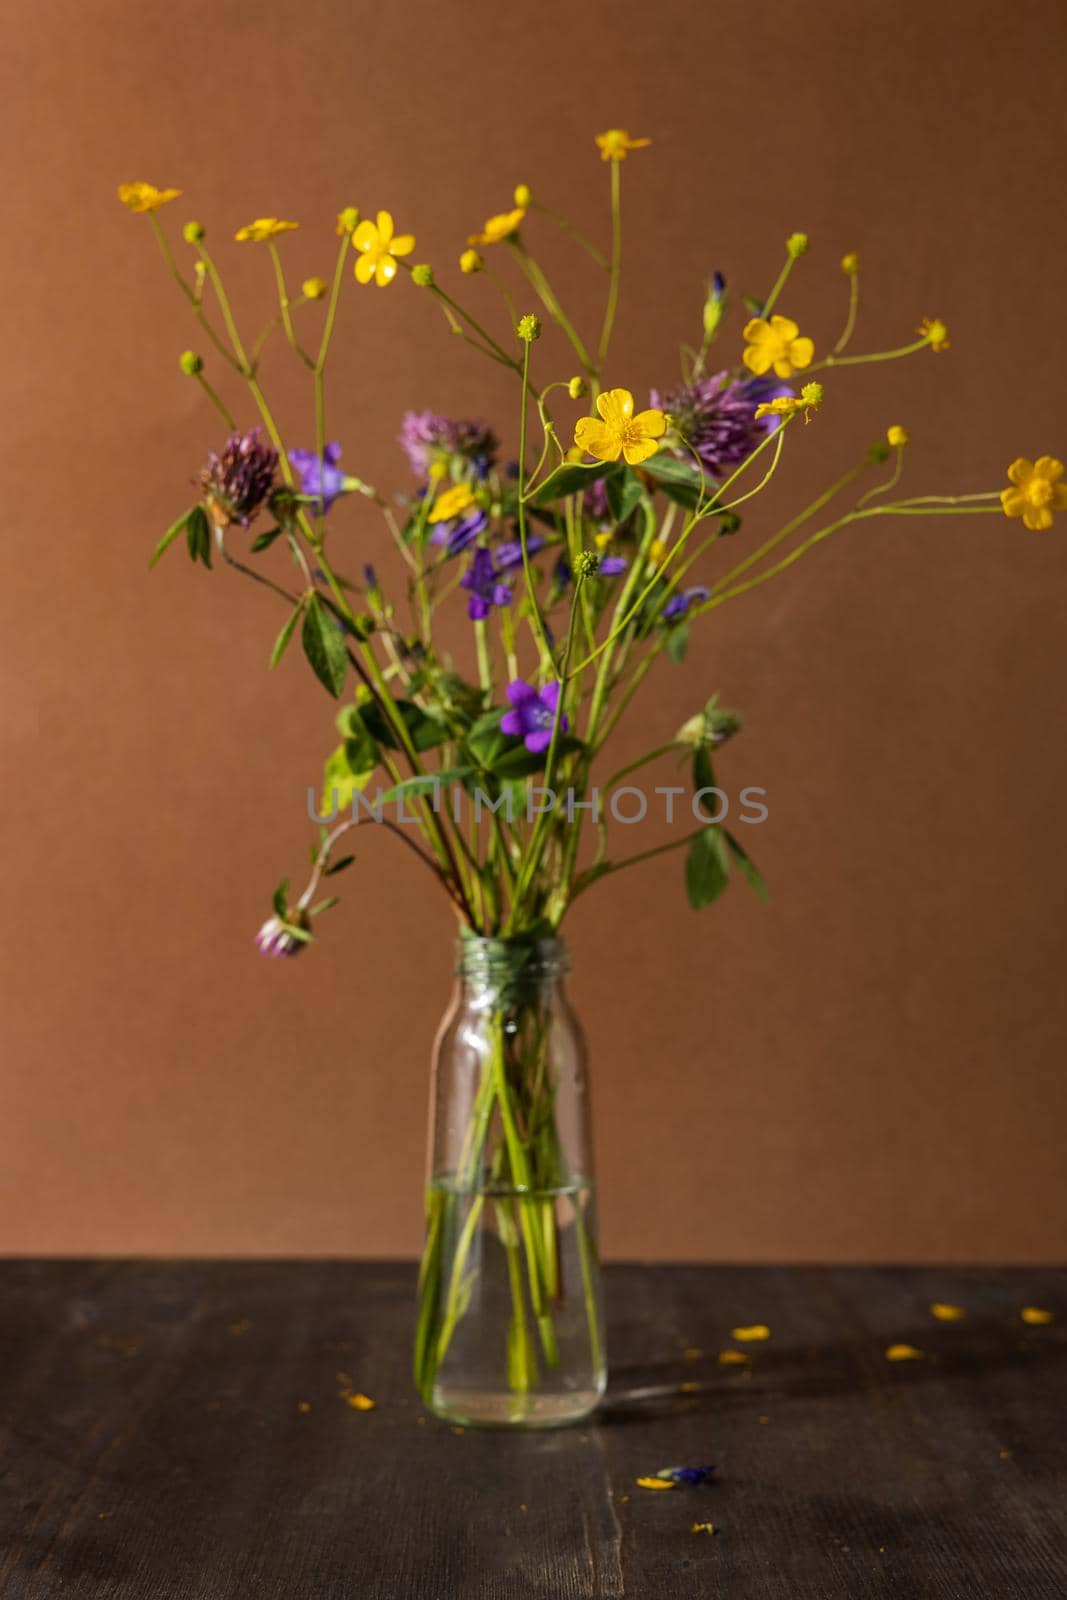 Bouquet of wild flowers on brown background, healing plant collection, still life composition side view